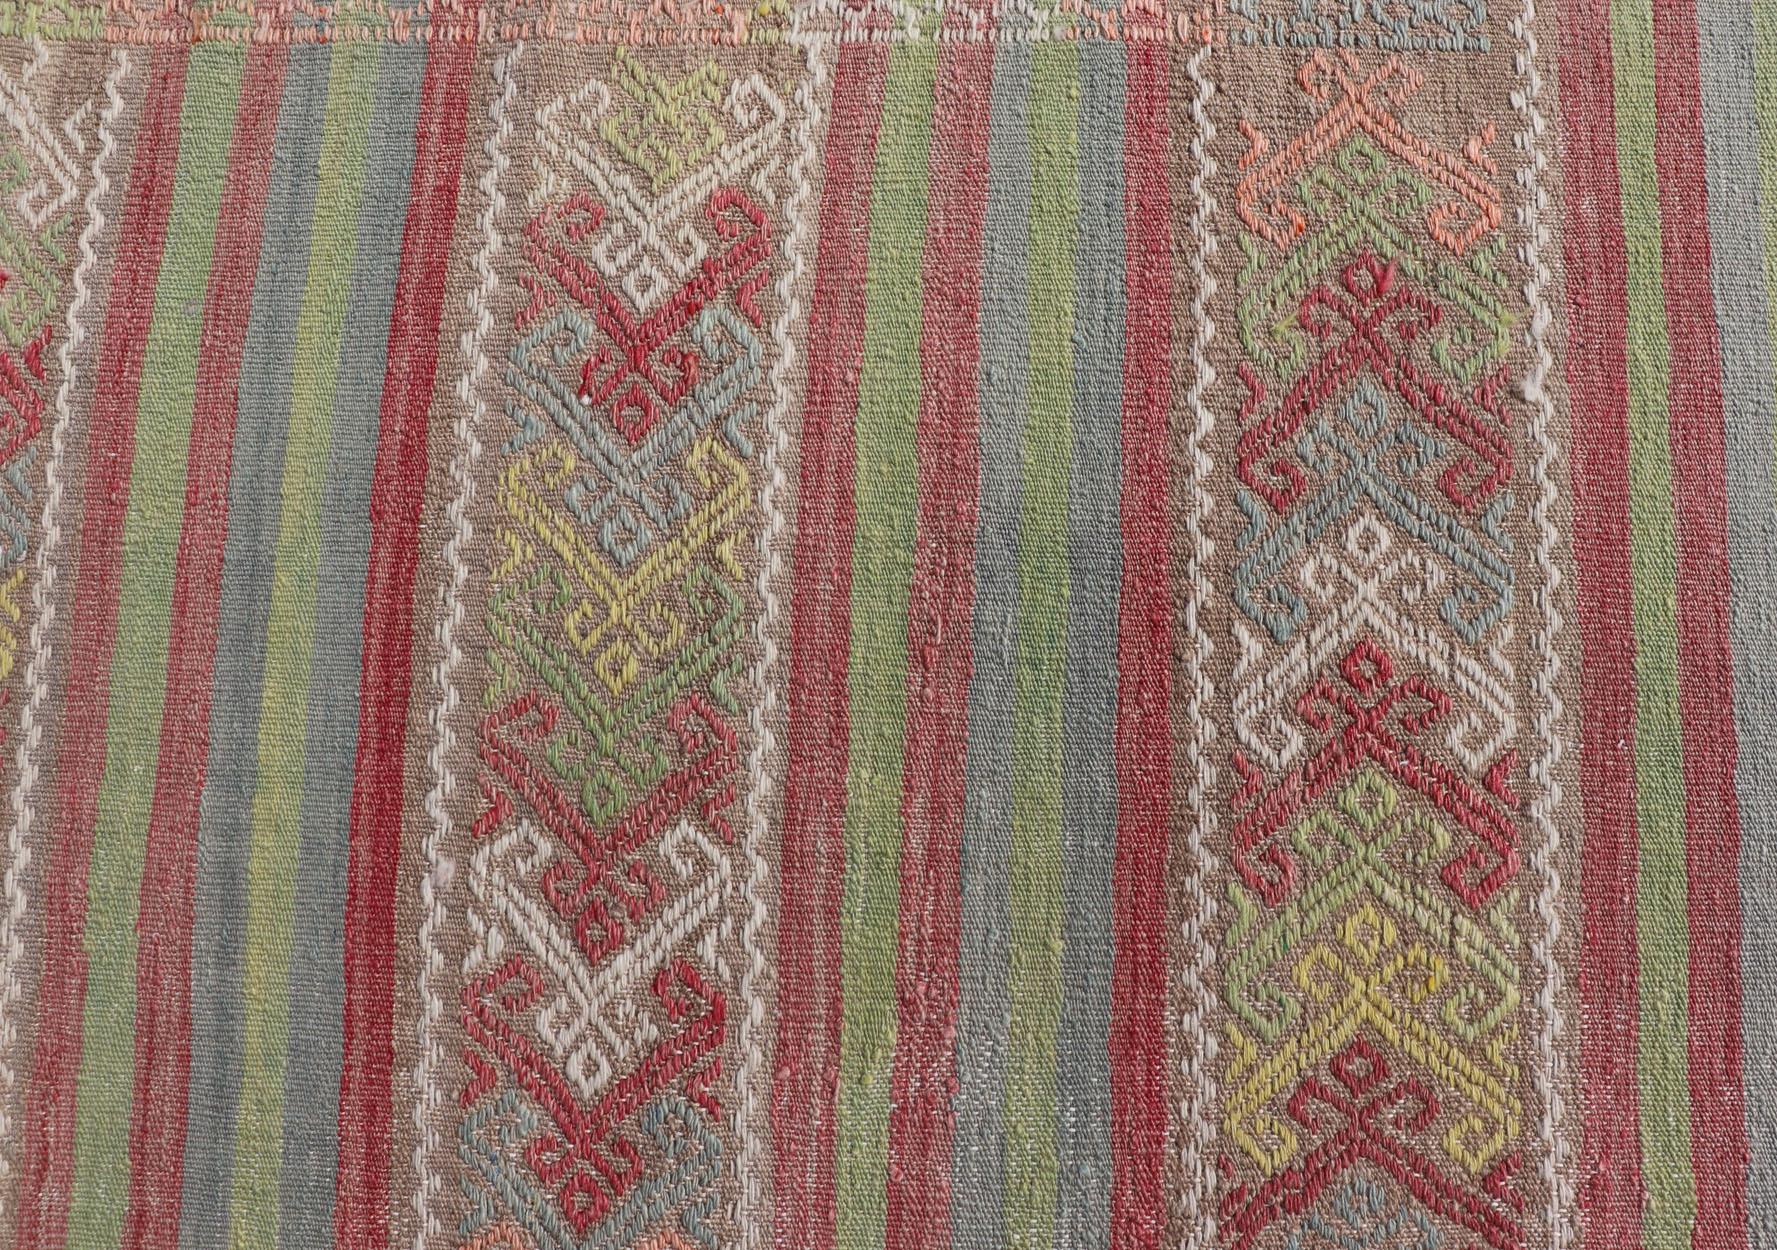 Colorful Vintage Embroidered Kilim with Stripes and Alternating Geometric Motifs For Sale 3